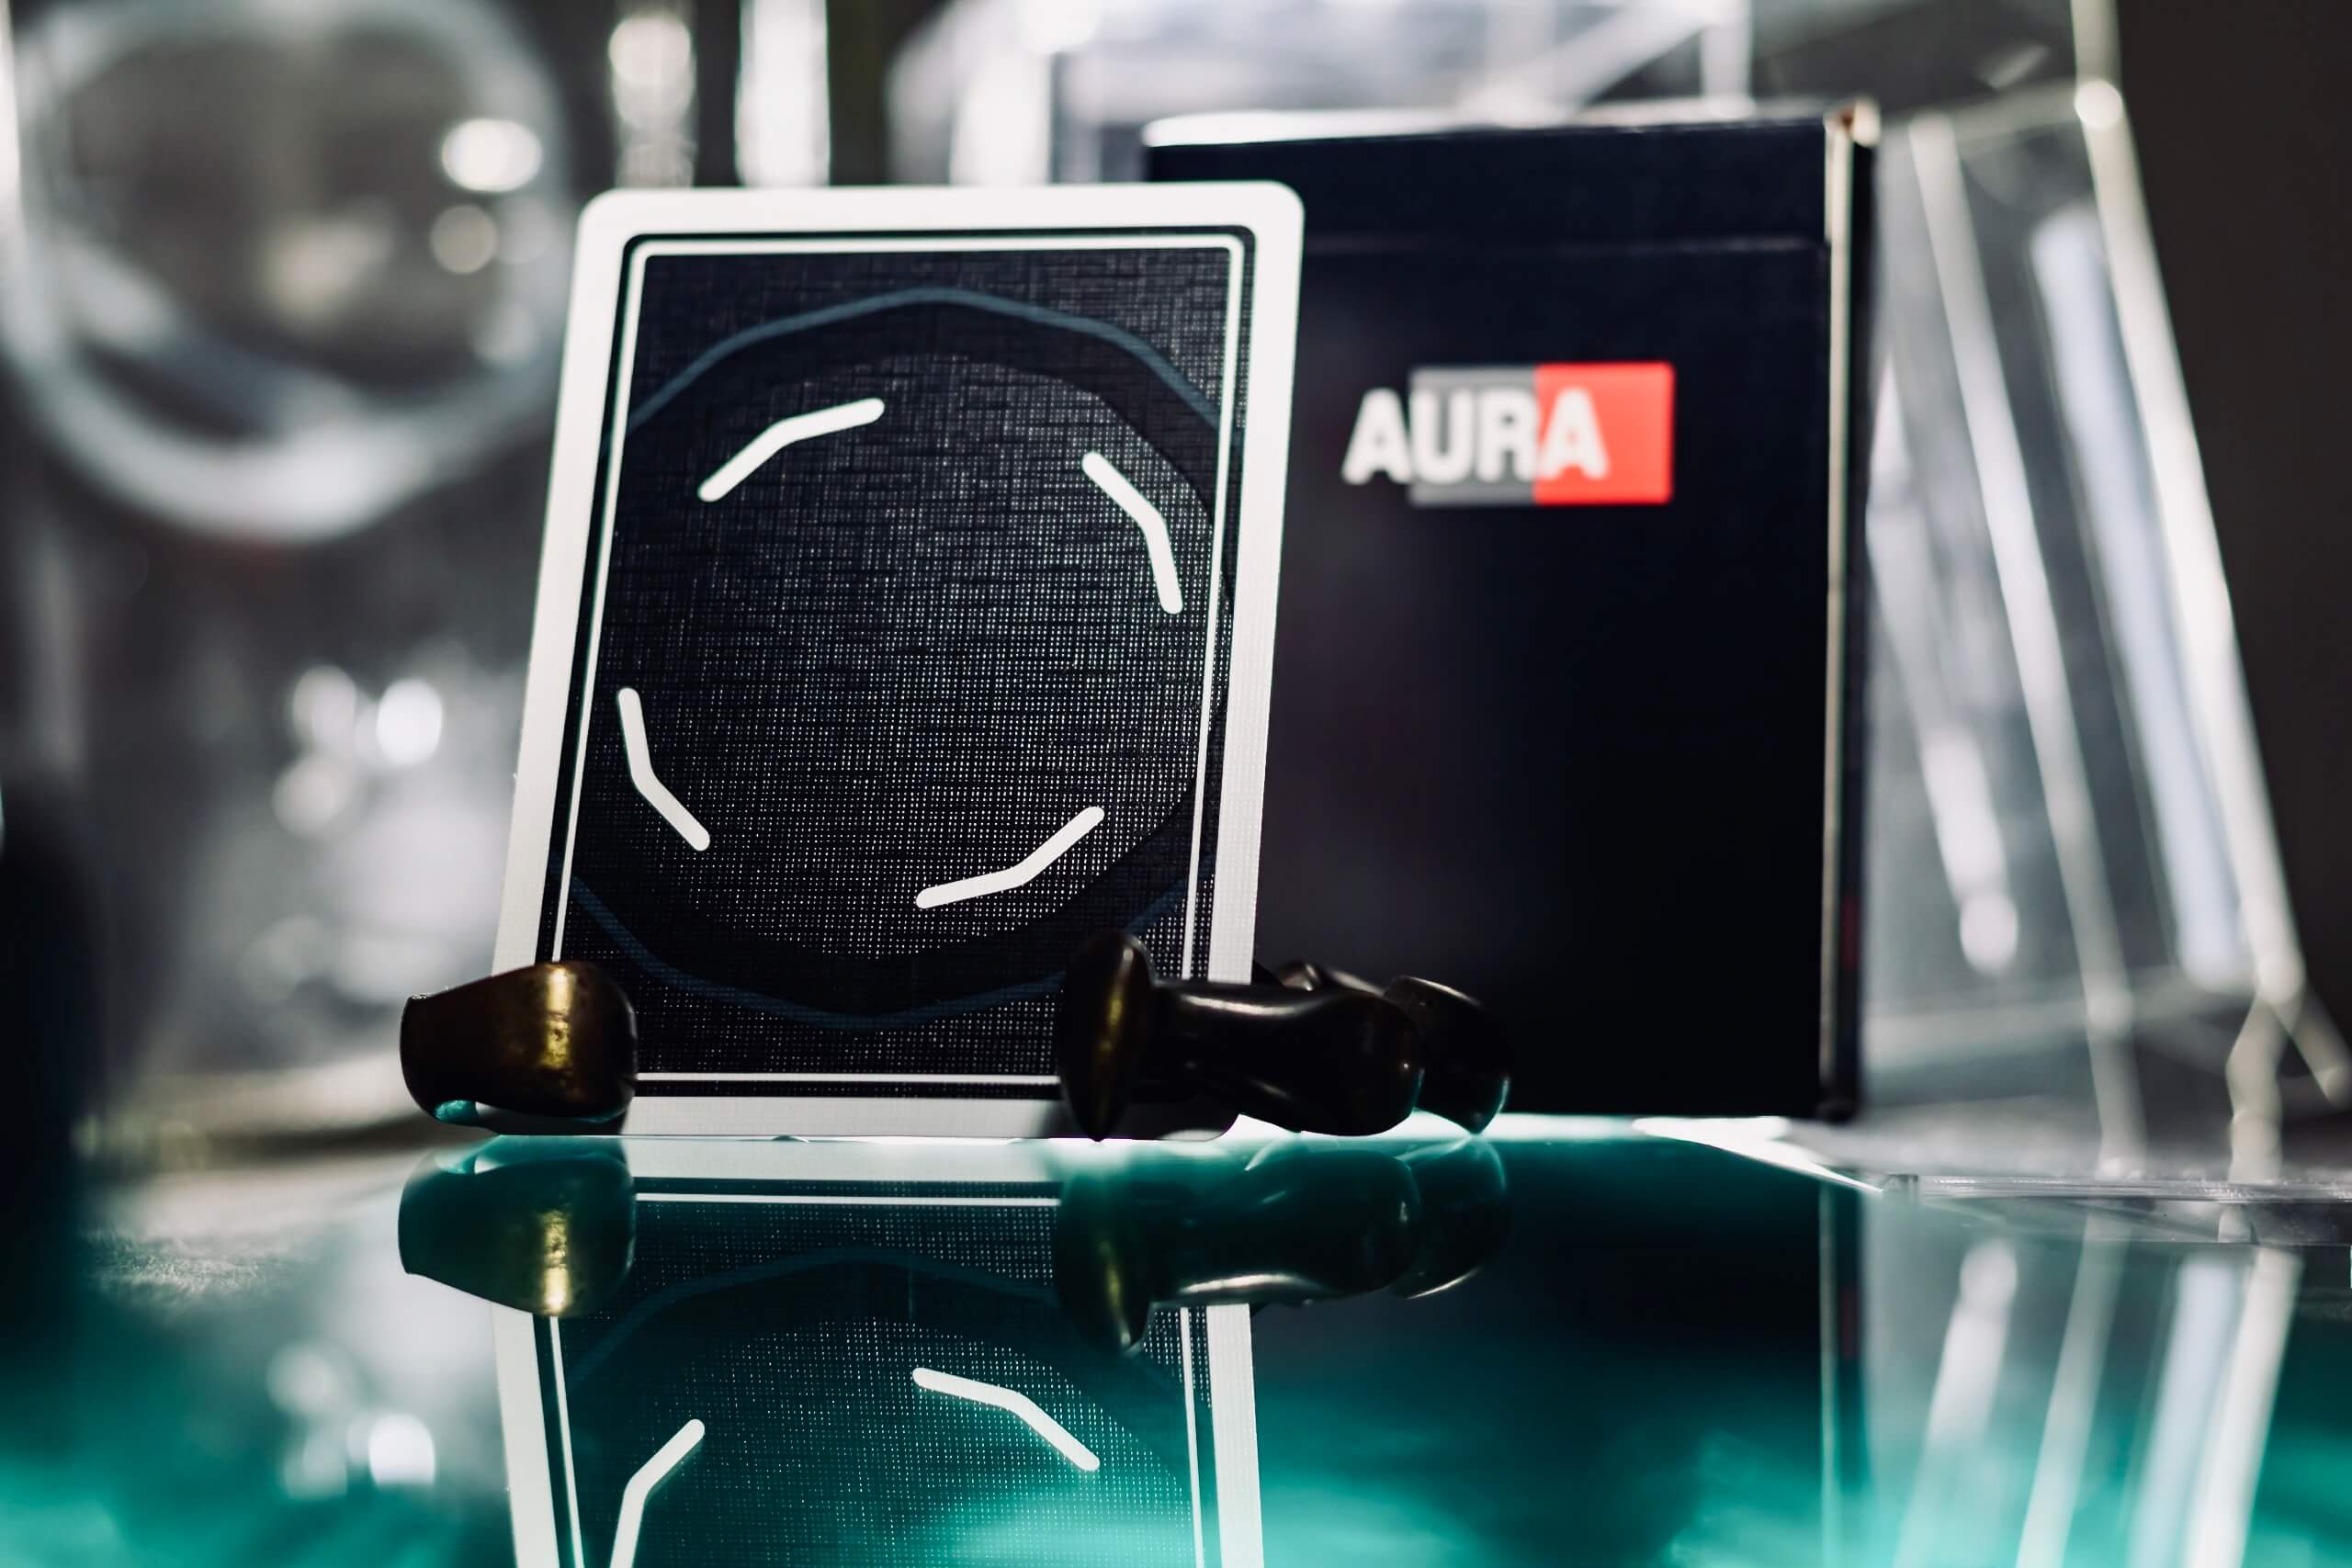 Aura playing cards